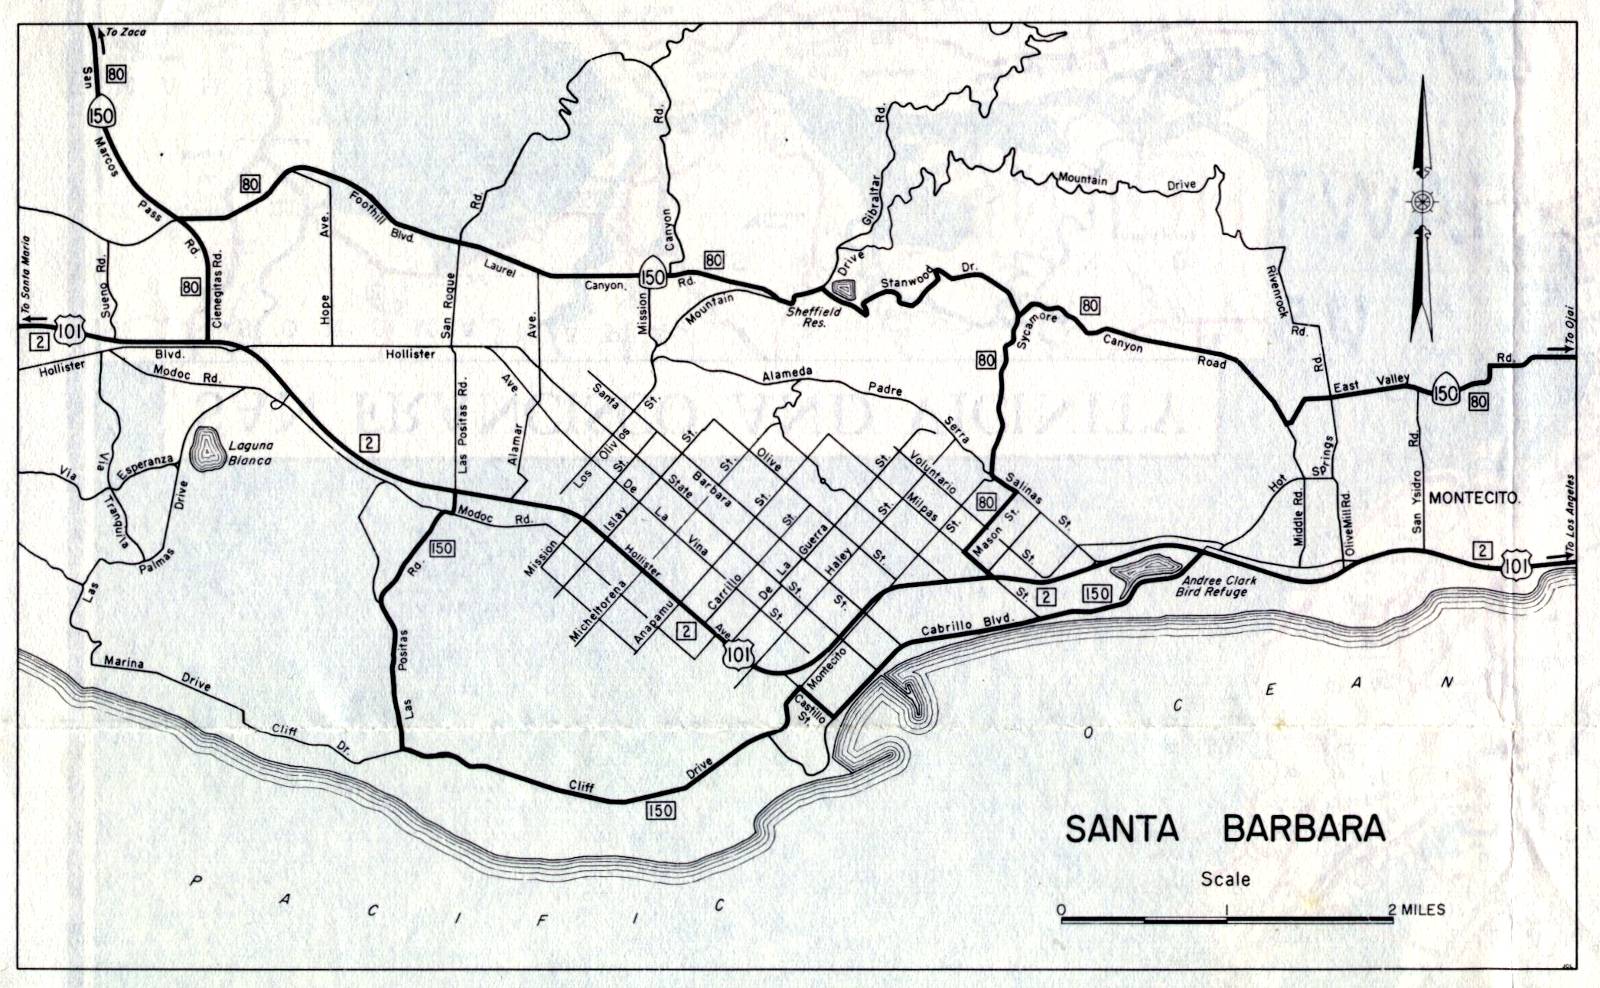 Detail map for Santa Barbara on the 1961 California official highway map